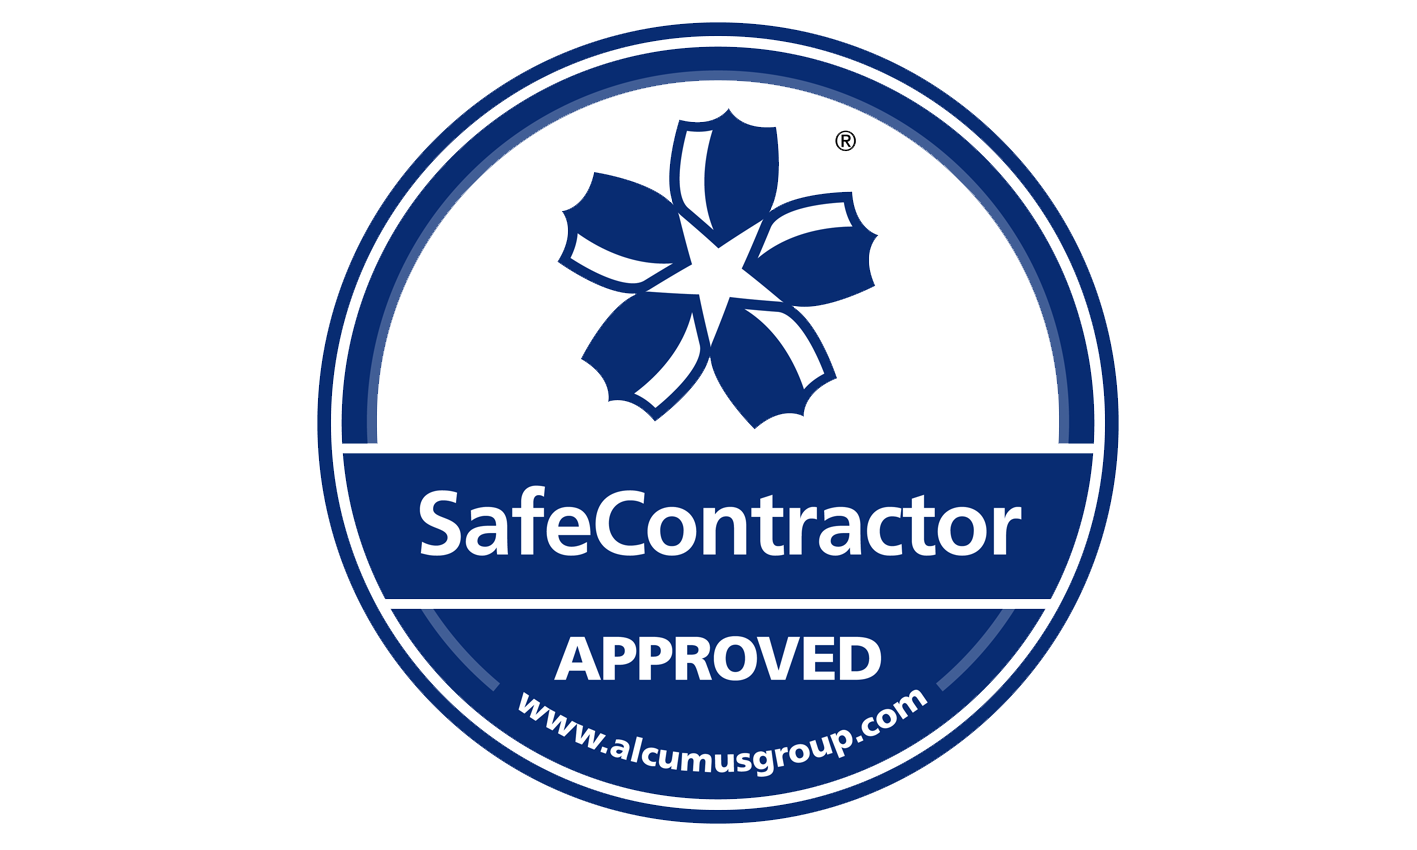 Premier Interior Systems - Safe Contractor Approved - Bespoke Joinery Fit Out - Hampshire Portsmouth Southampton